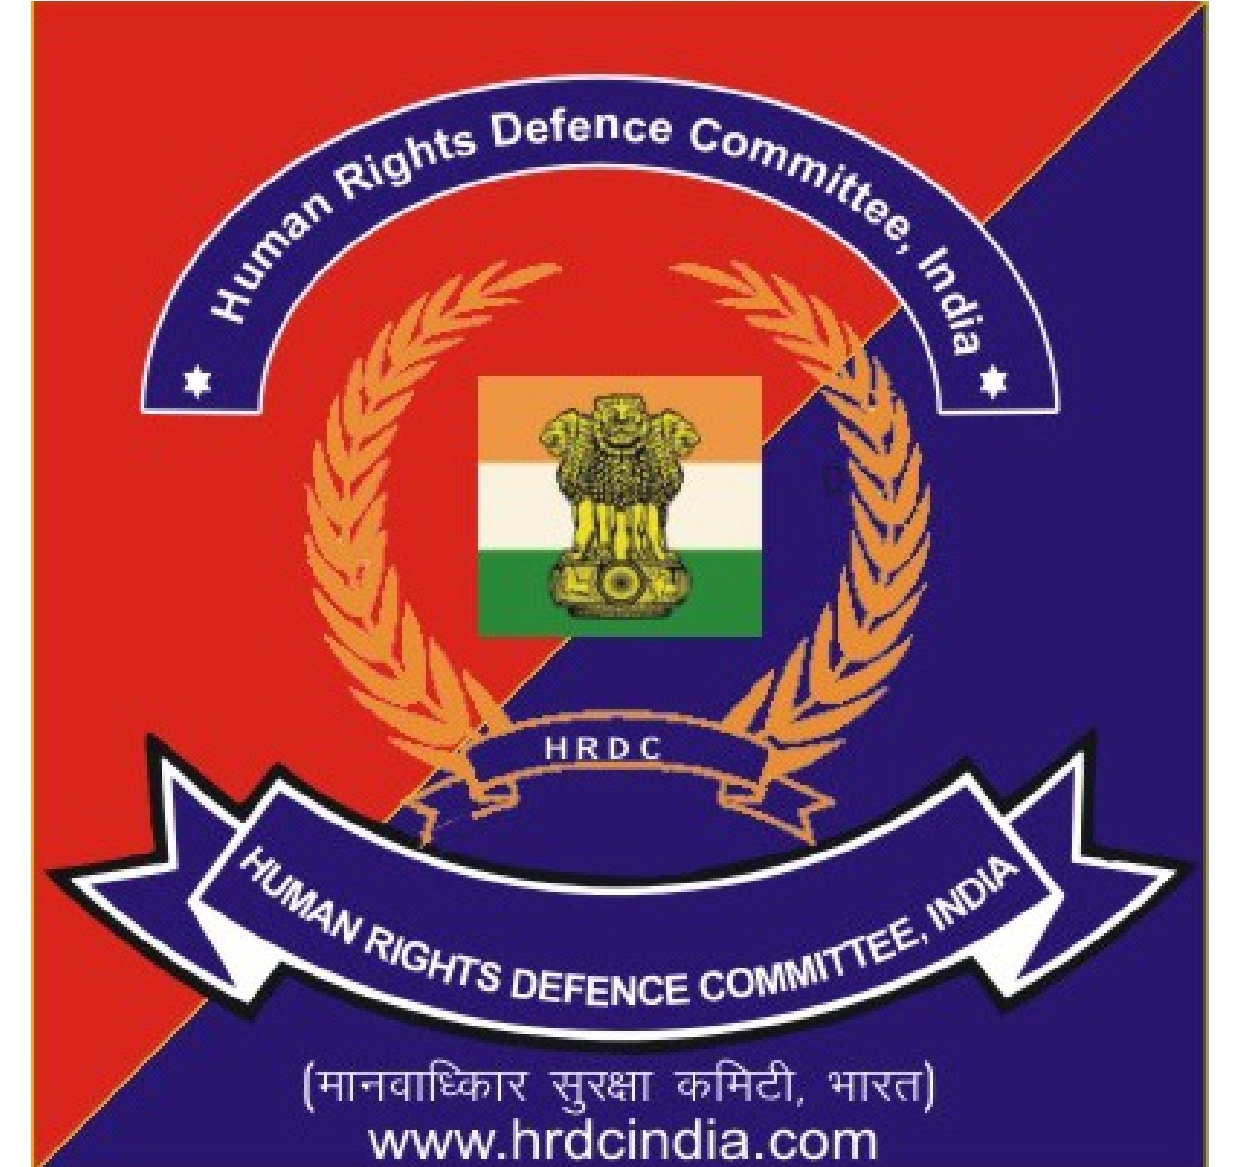 Human Rights Defence Committee INDIA